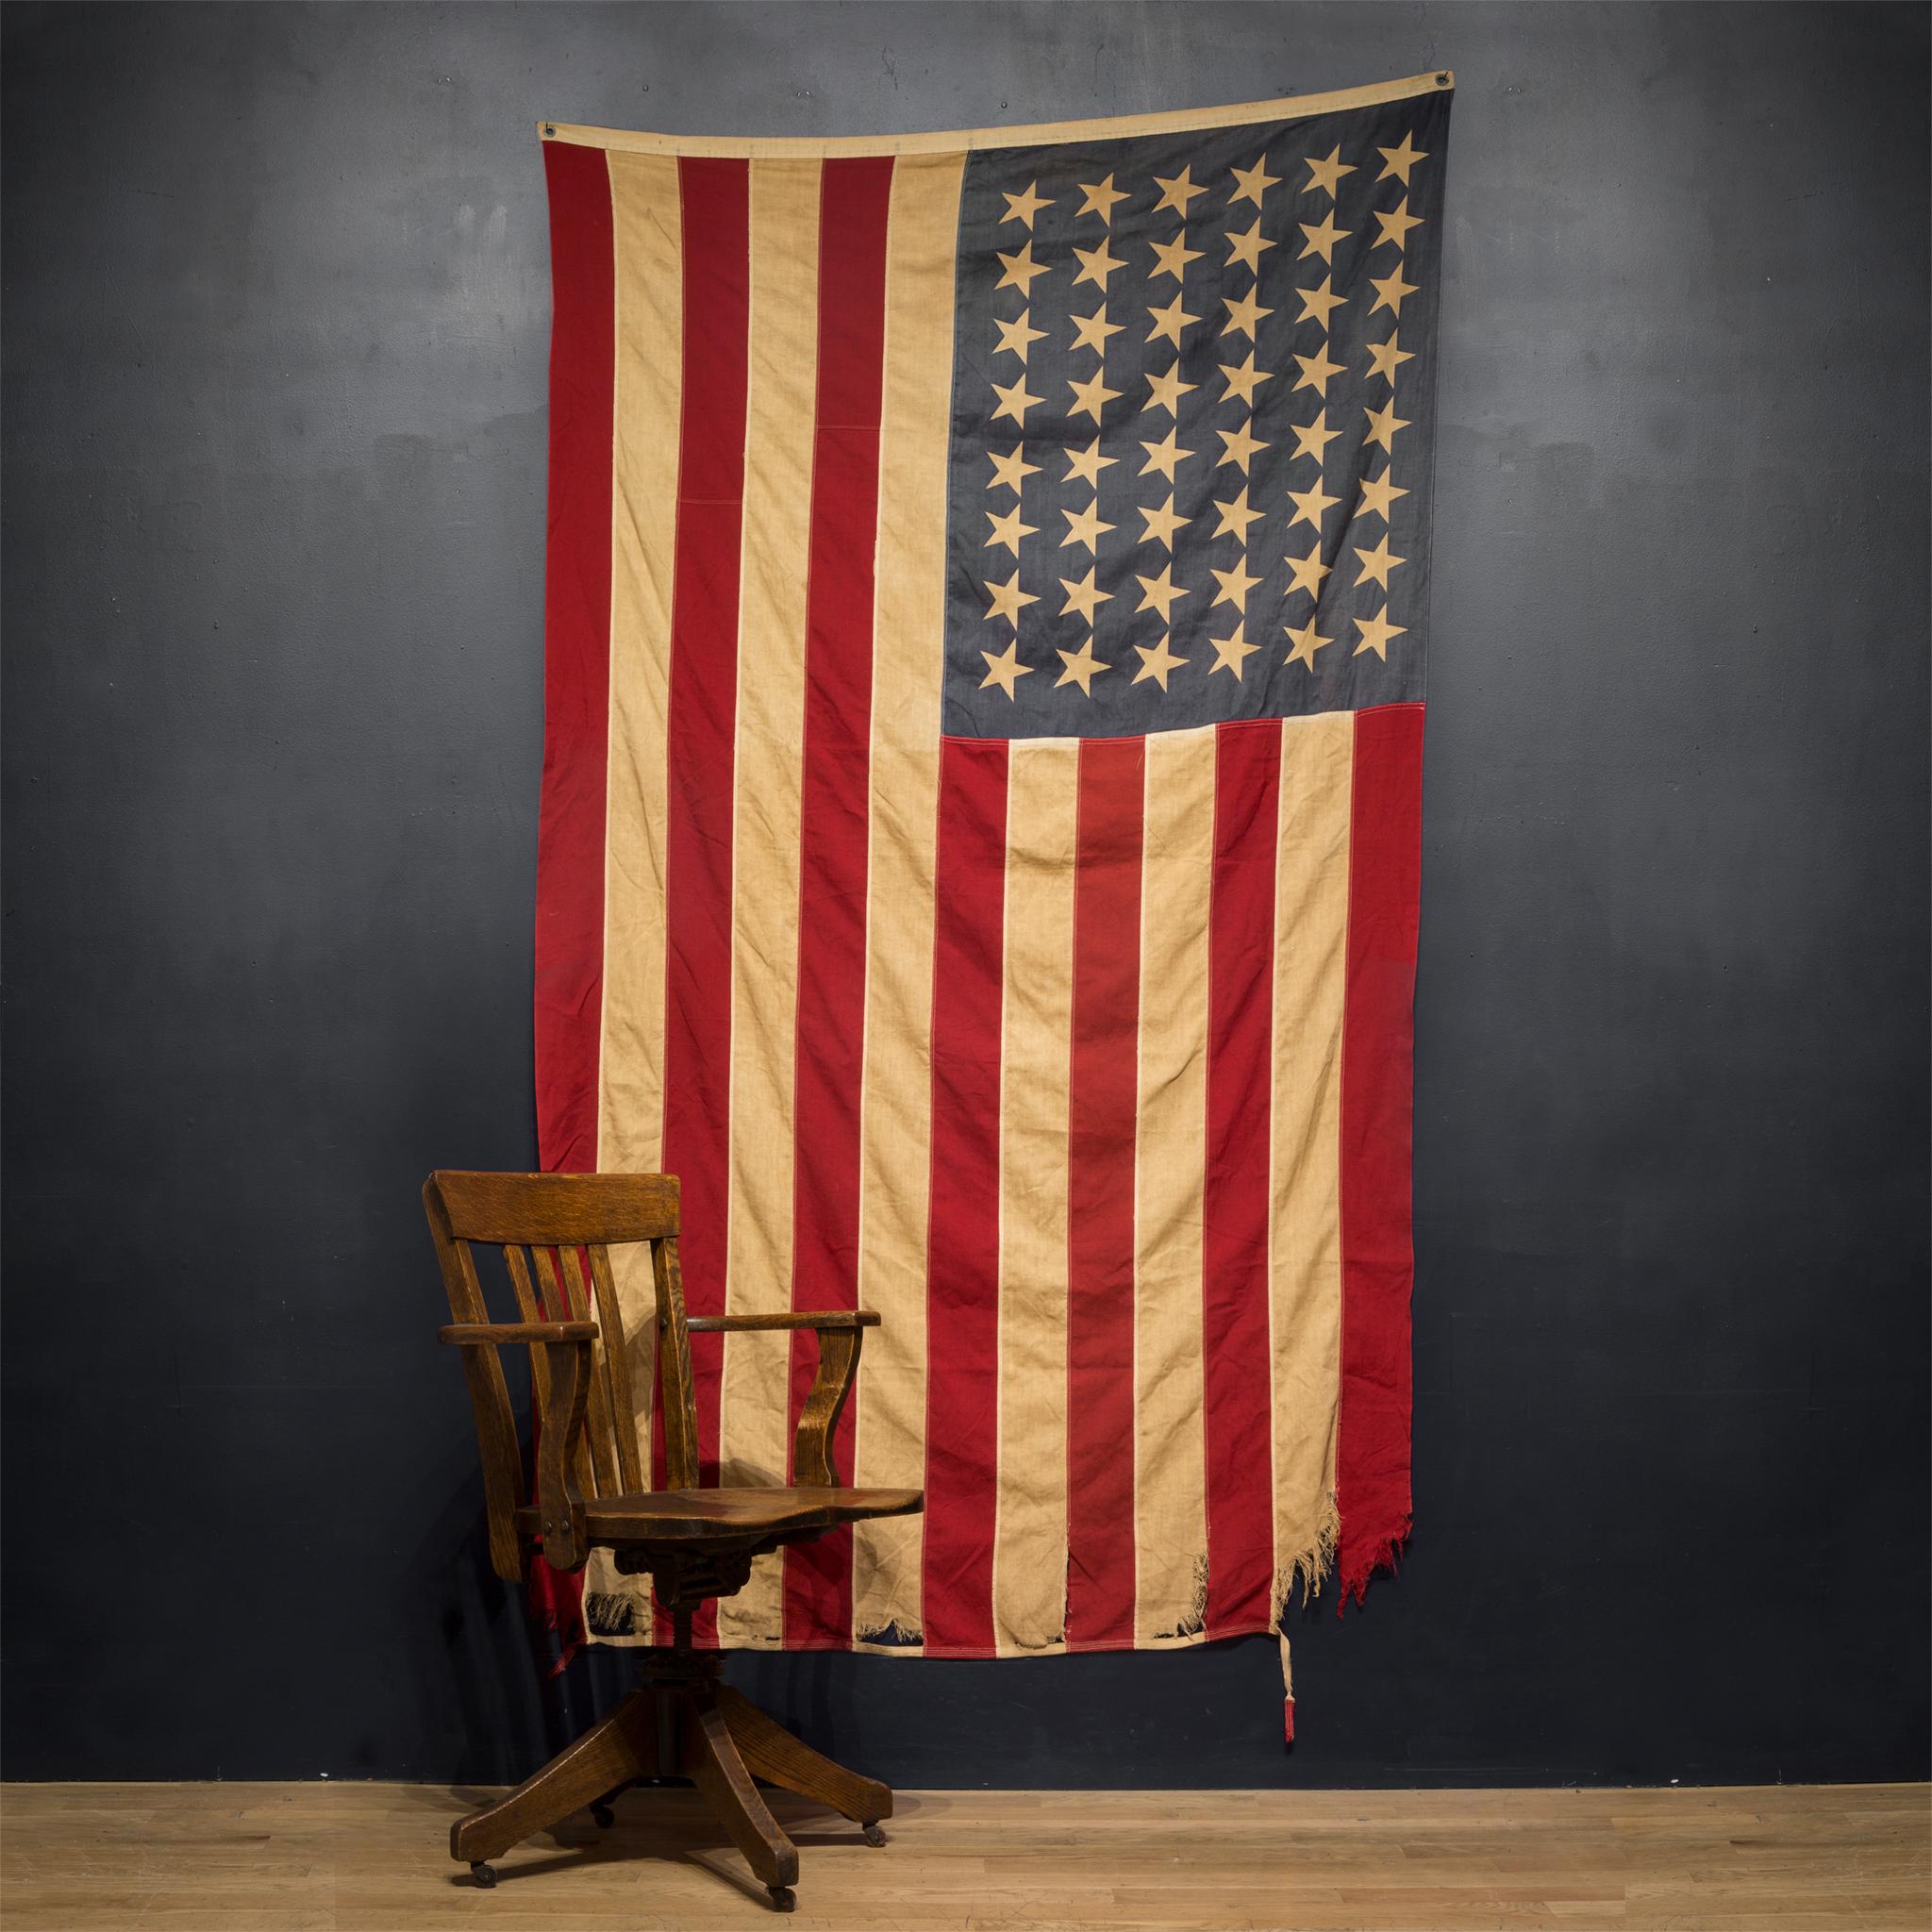 This is an original fabric large American flag with 48 stars. The flag has retained its original color with some structural damage slight fading.

Creator Unknown.
 Date of manufacture circa pre 1940s
Materials and techniques: Fabric.
Condition: